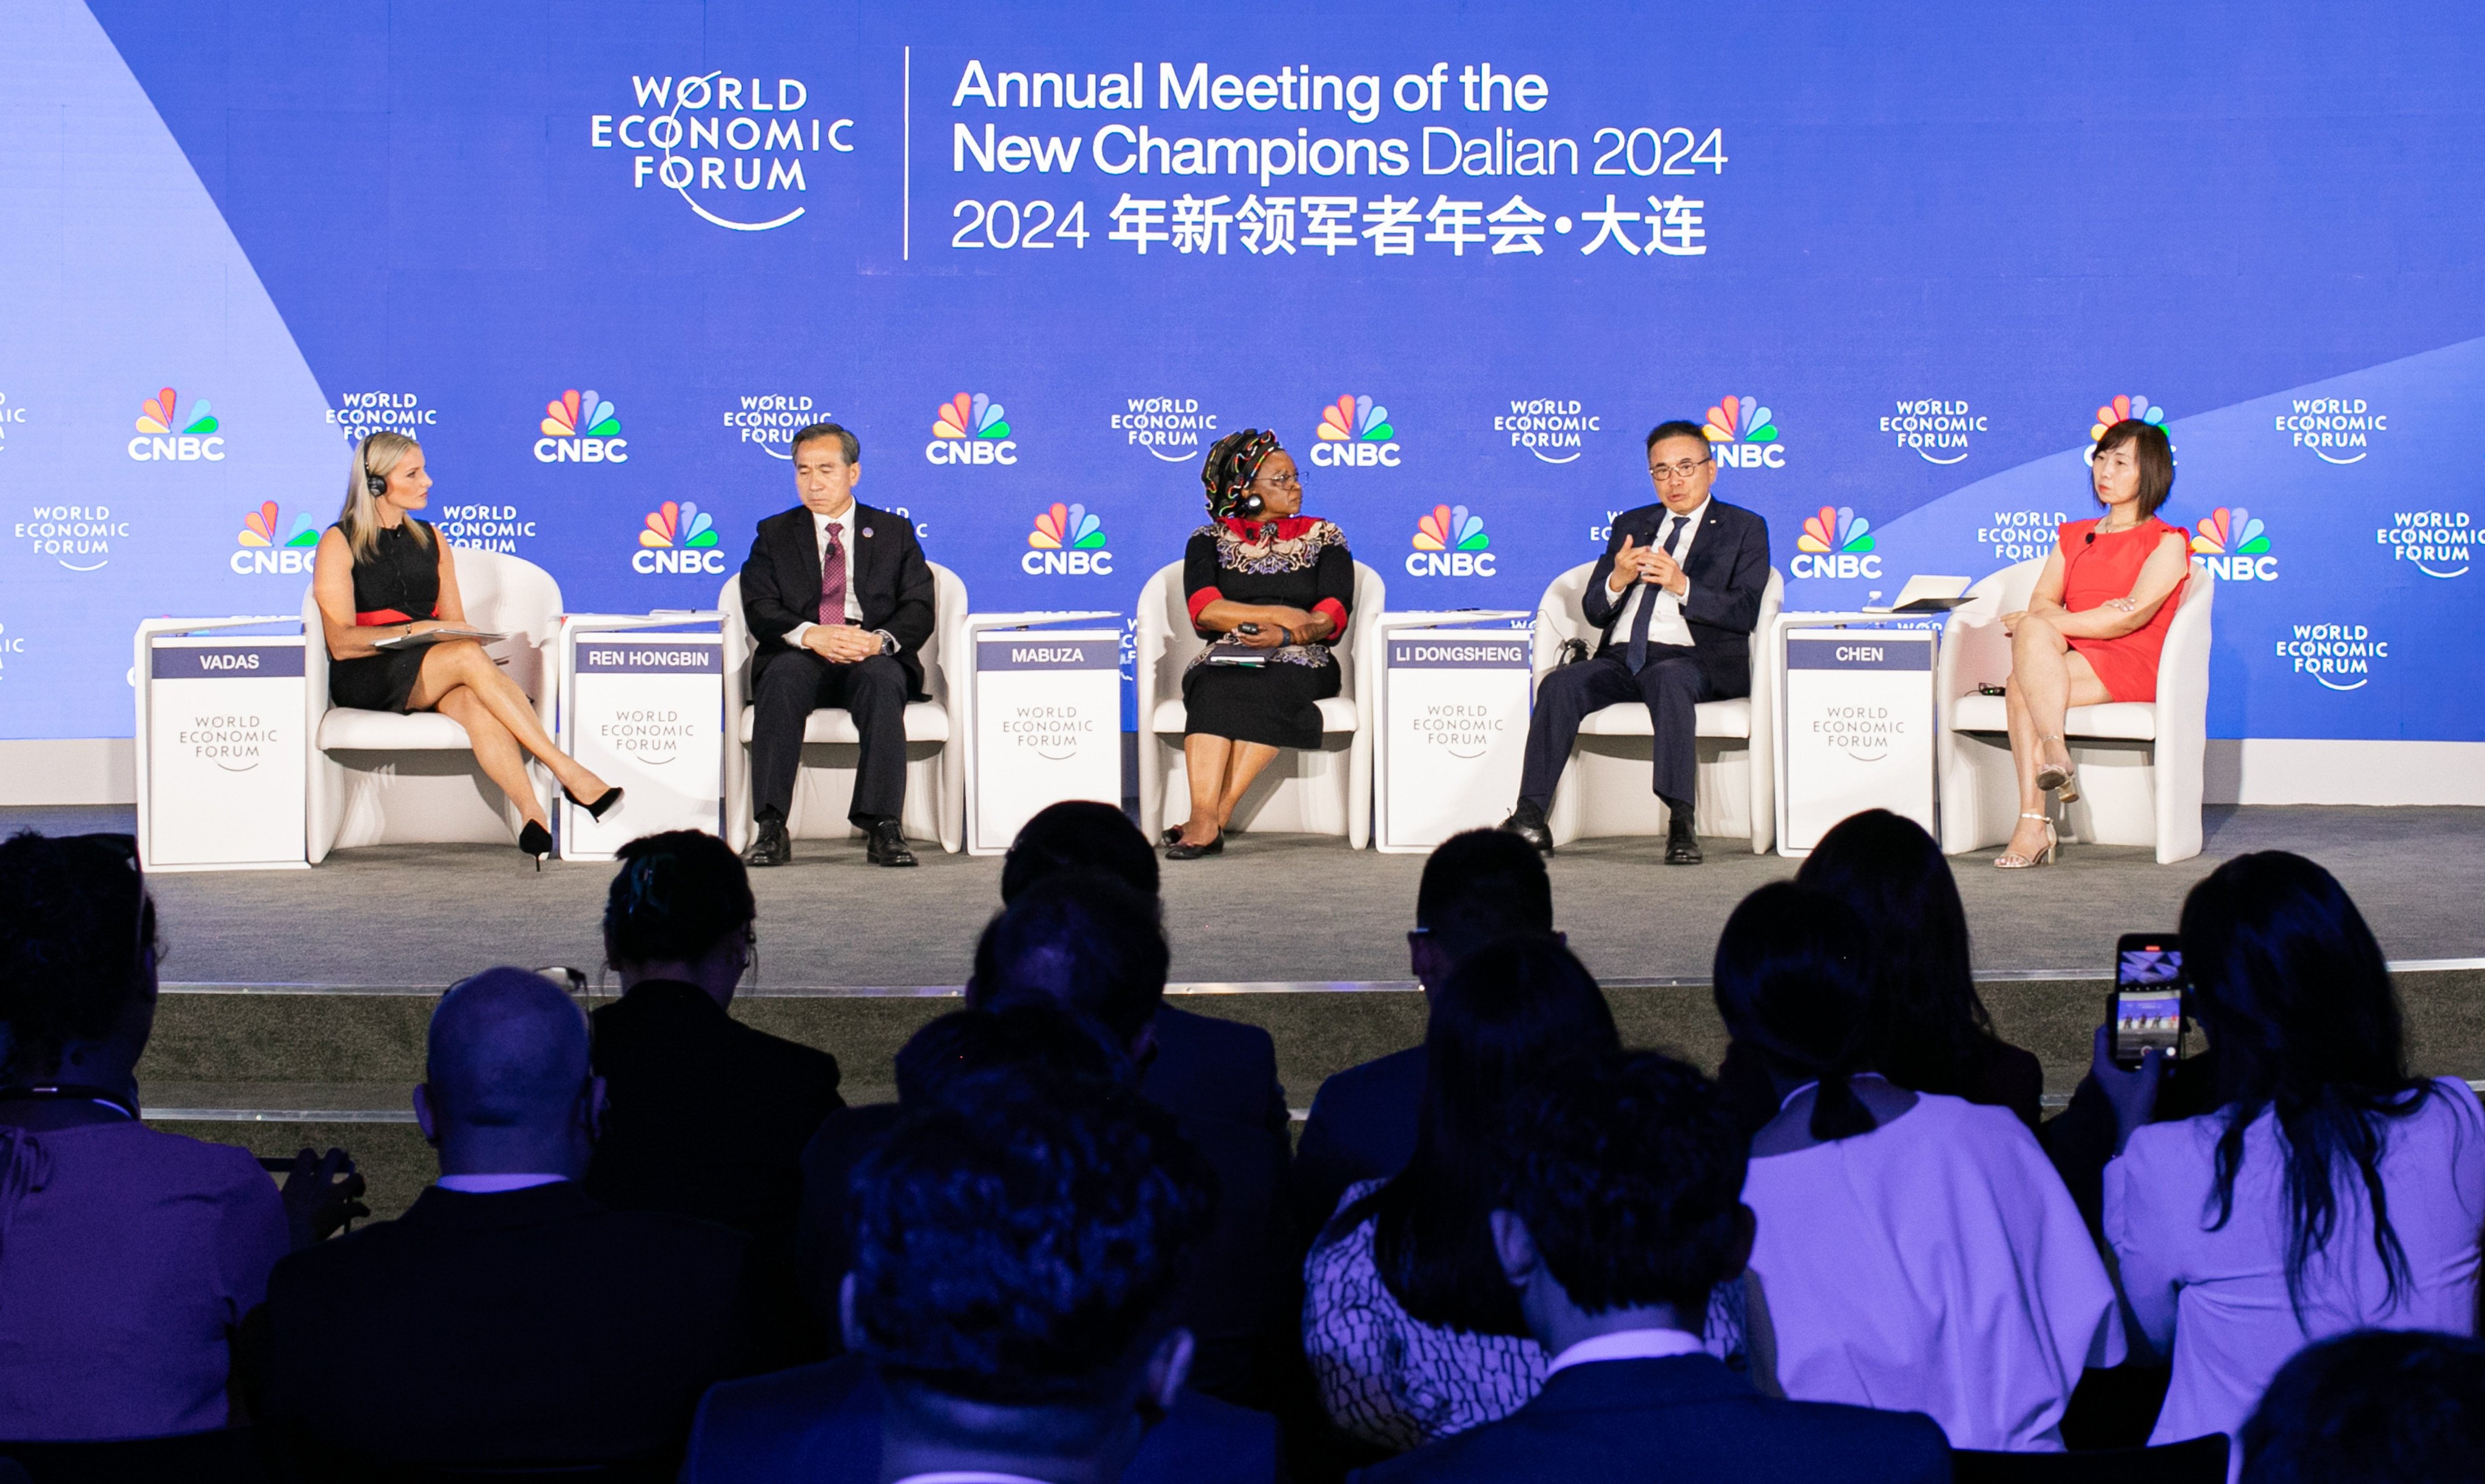 Li Dongsheng (second right) and Ren Hongbin (second left) during a session at the Annual Meeting of the New Champions in Dalian. Photo: World Economic Forum